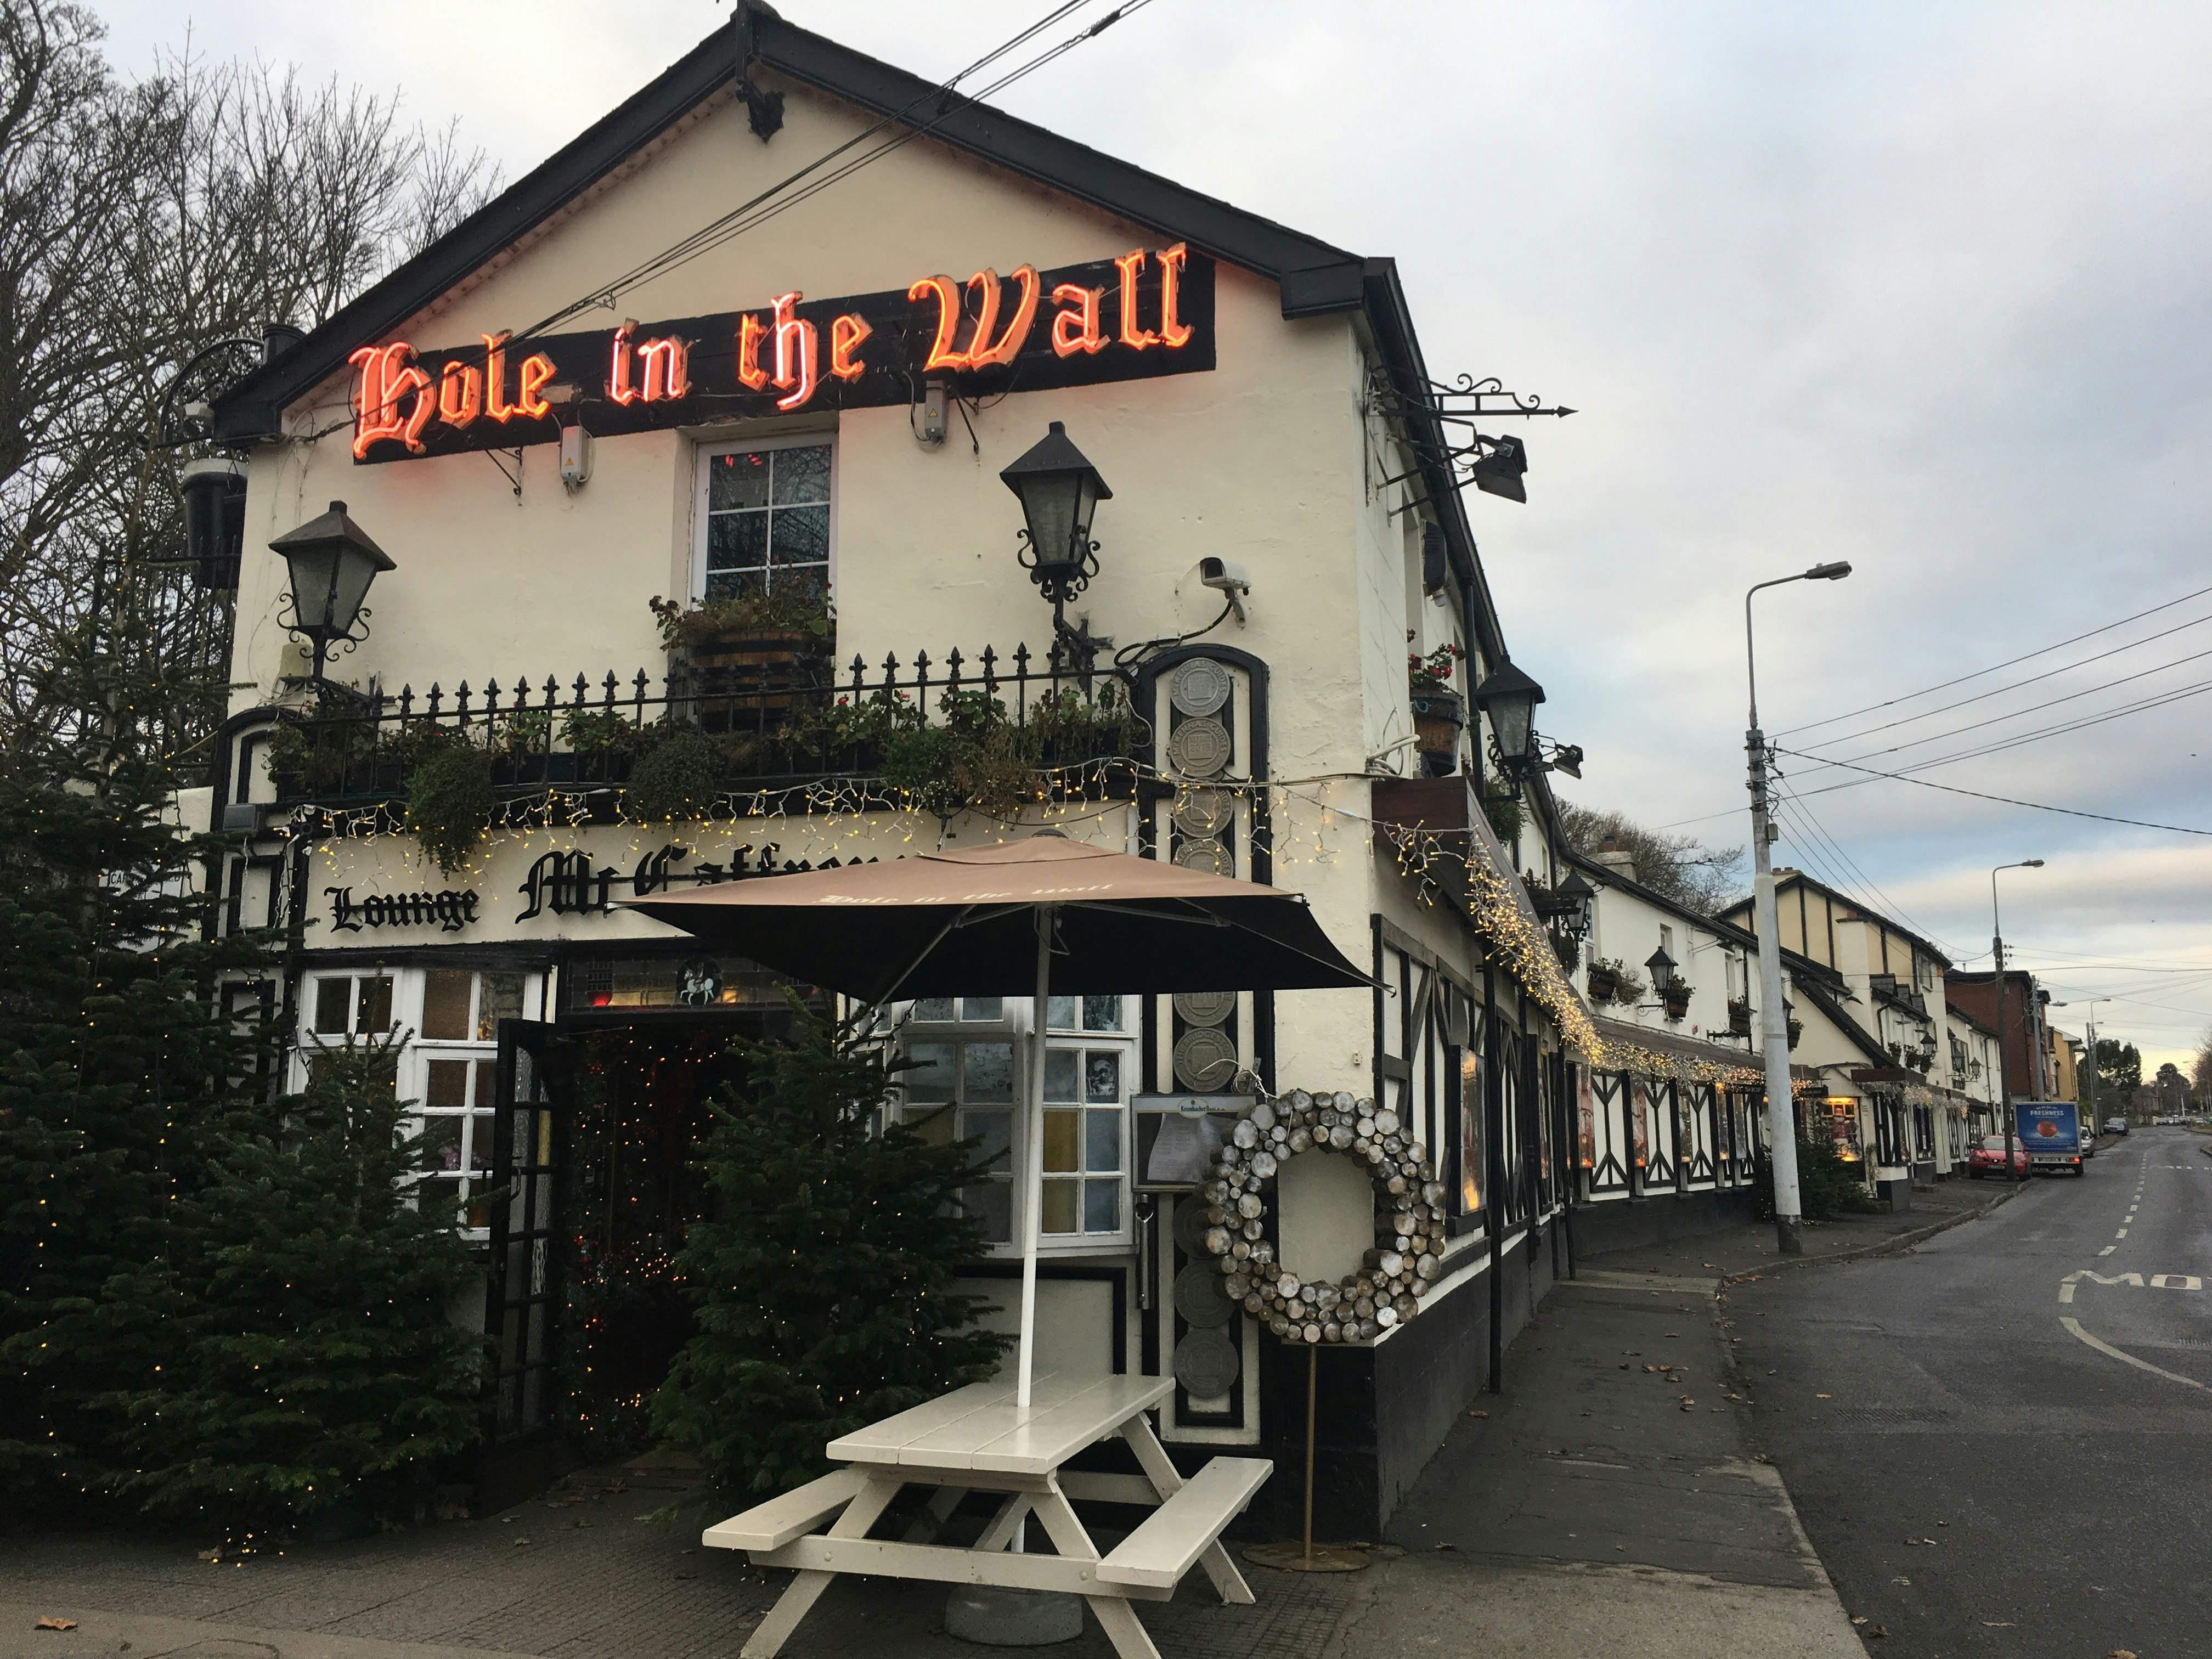 Exterior shot of Hole in the Wall pub